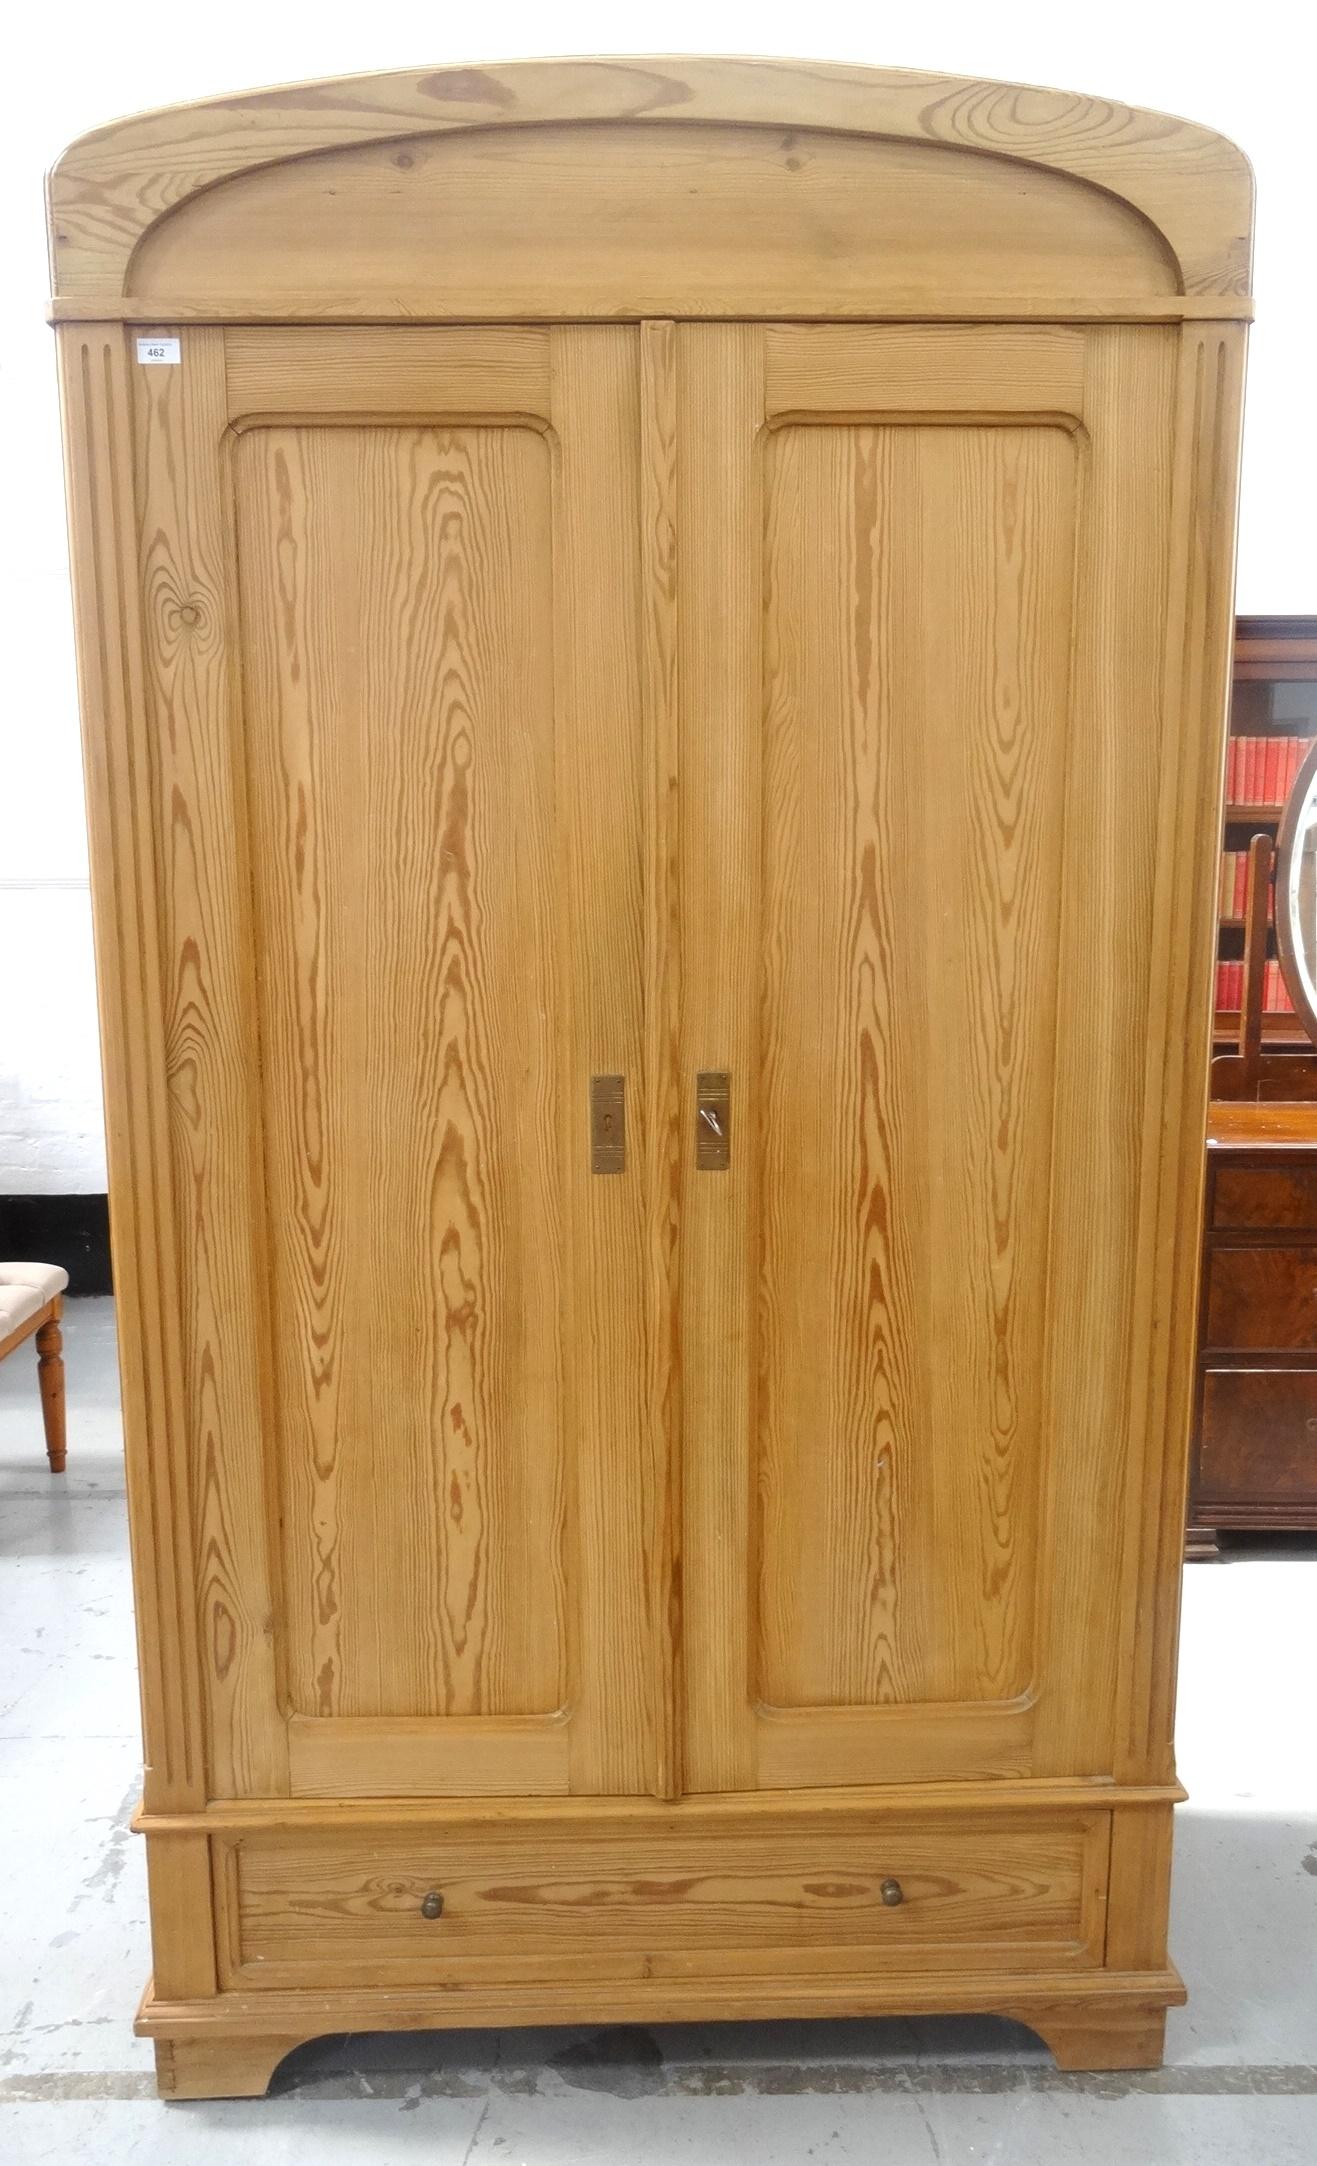 WAXED PINE WARDROBE the arched top above a pair of panelled doors opening to reveal a shelf and